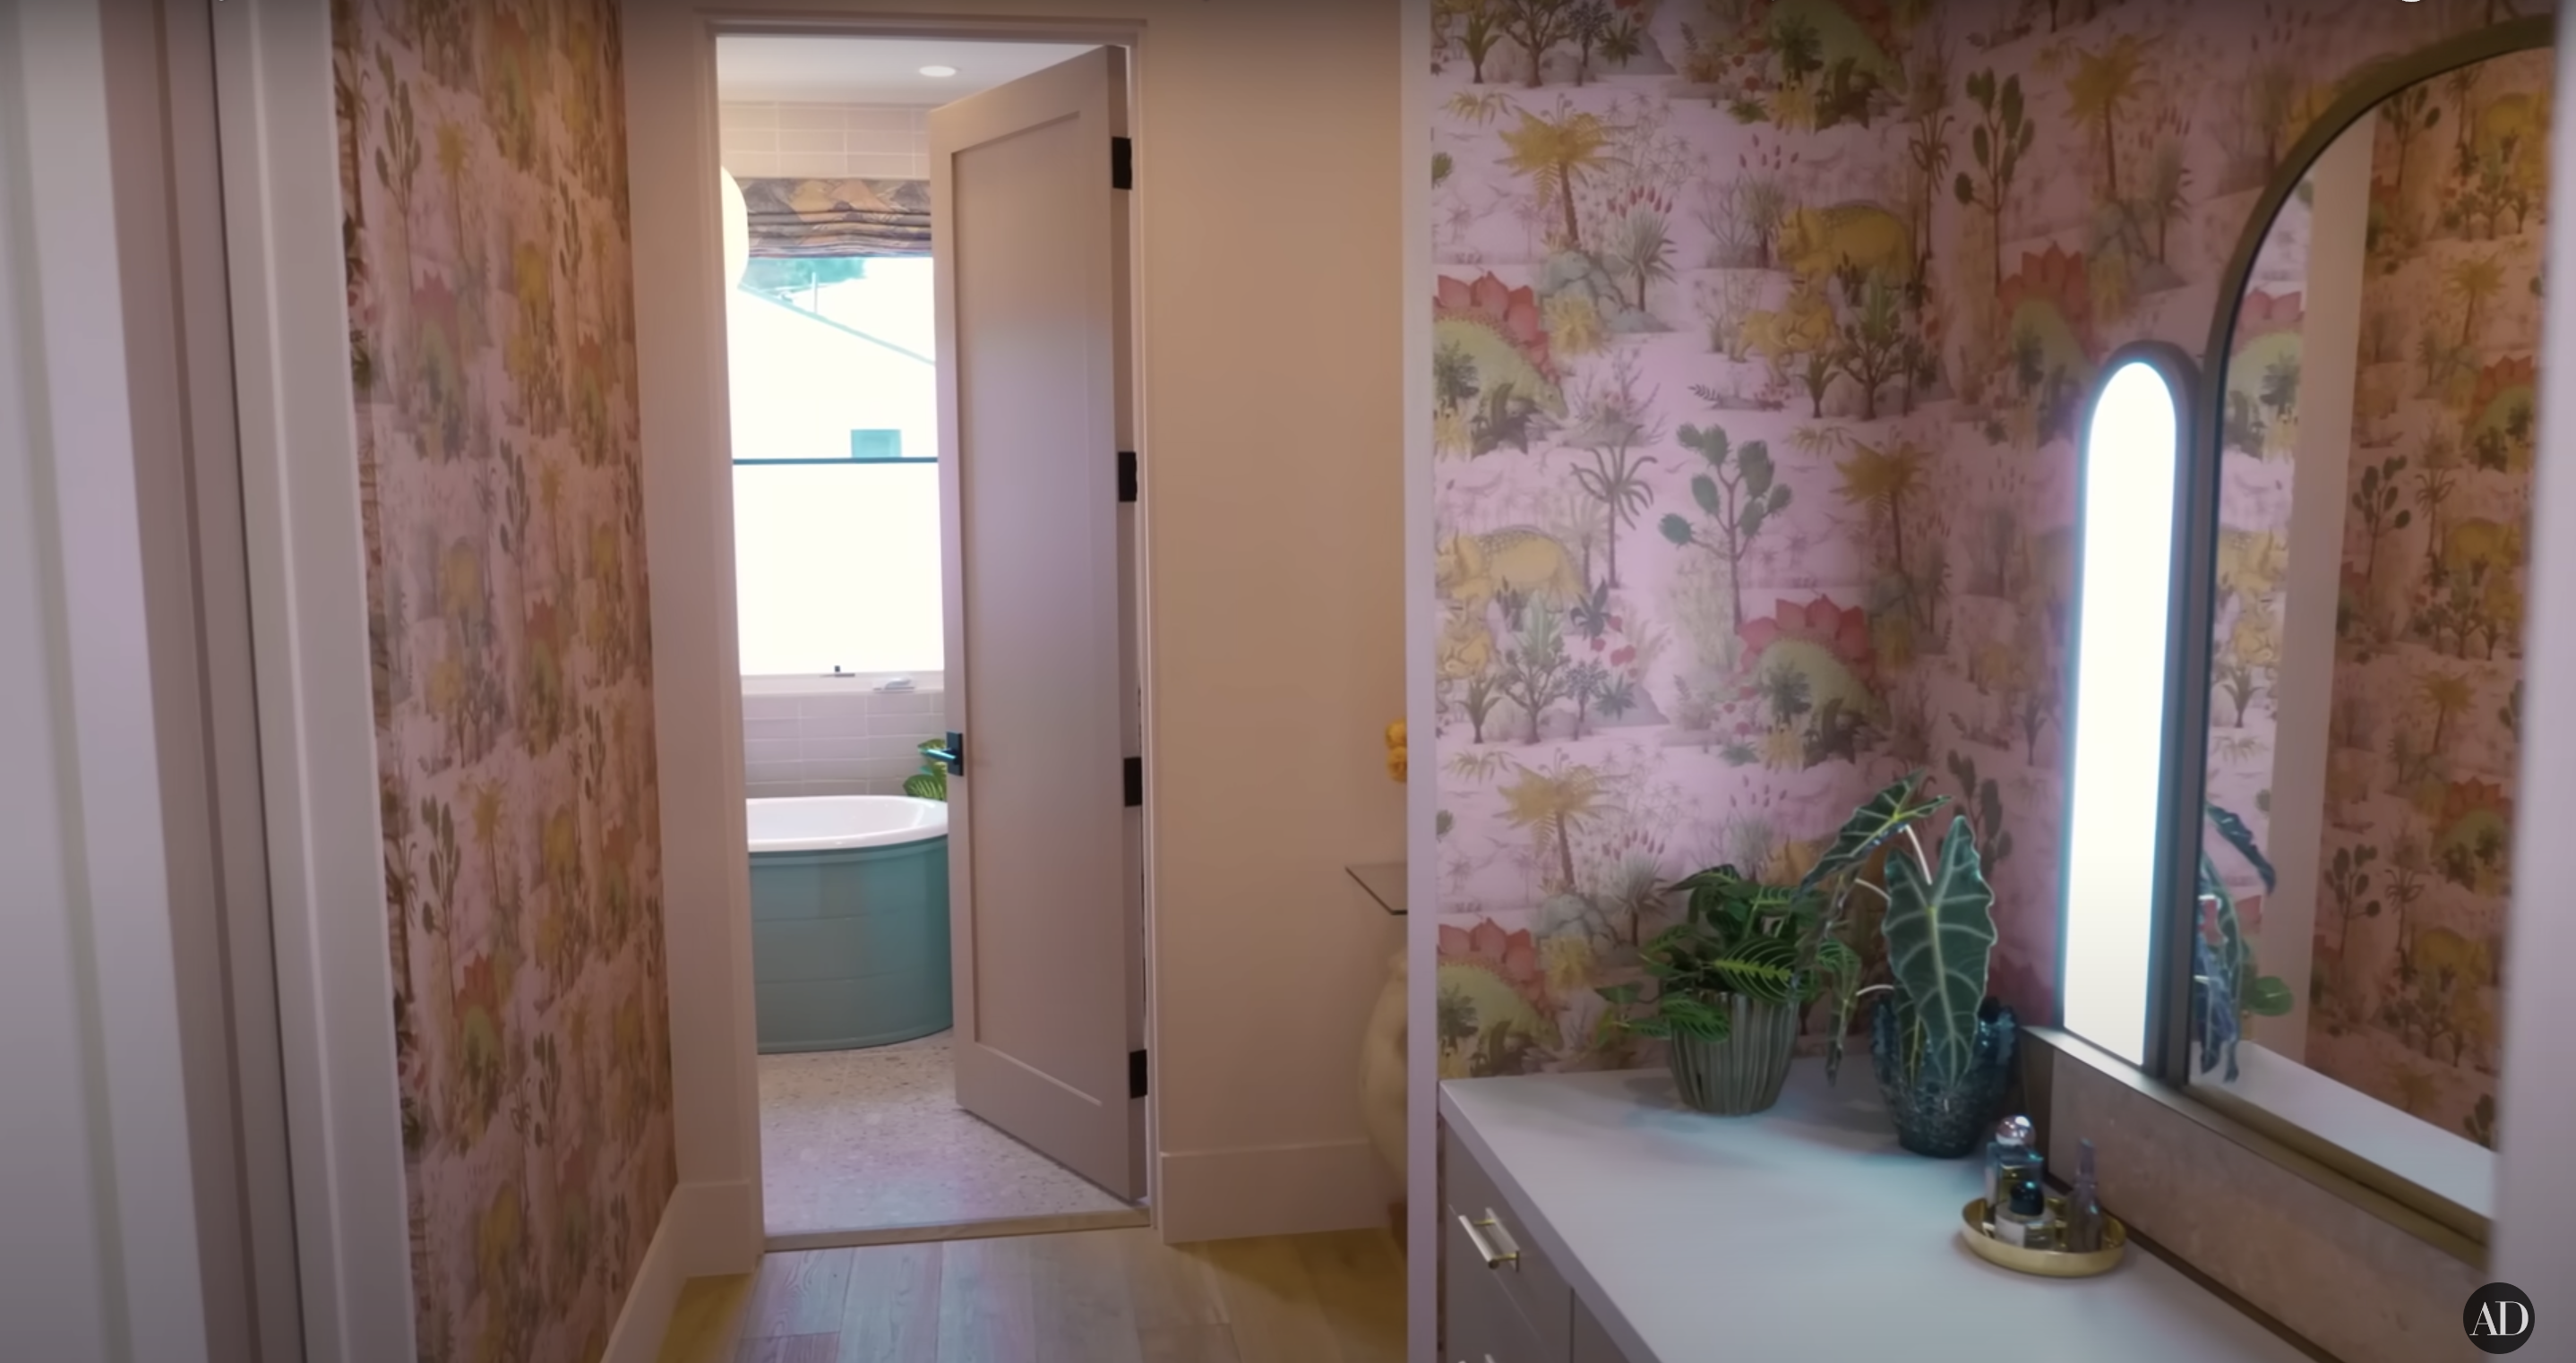 The vanity room in Bryce Howard Dallas and Seth Gabel's Los Angeles Home | Source: https://www.youtube.com/@Archdigest